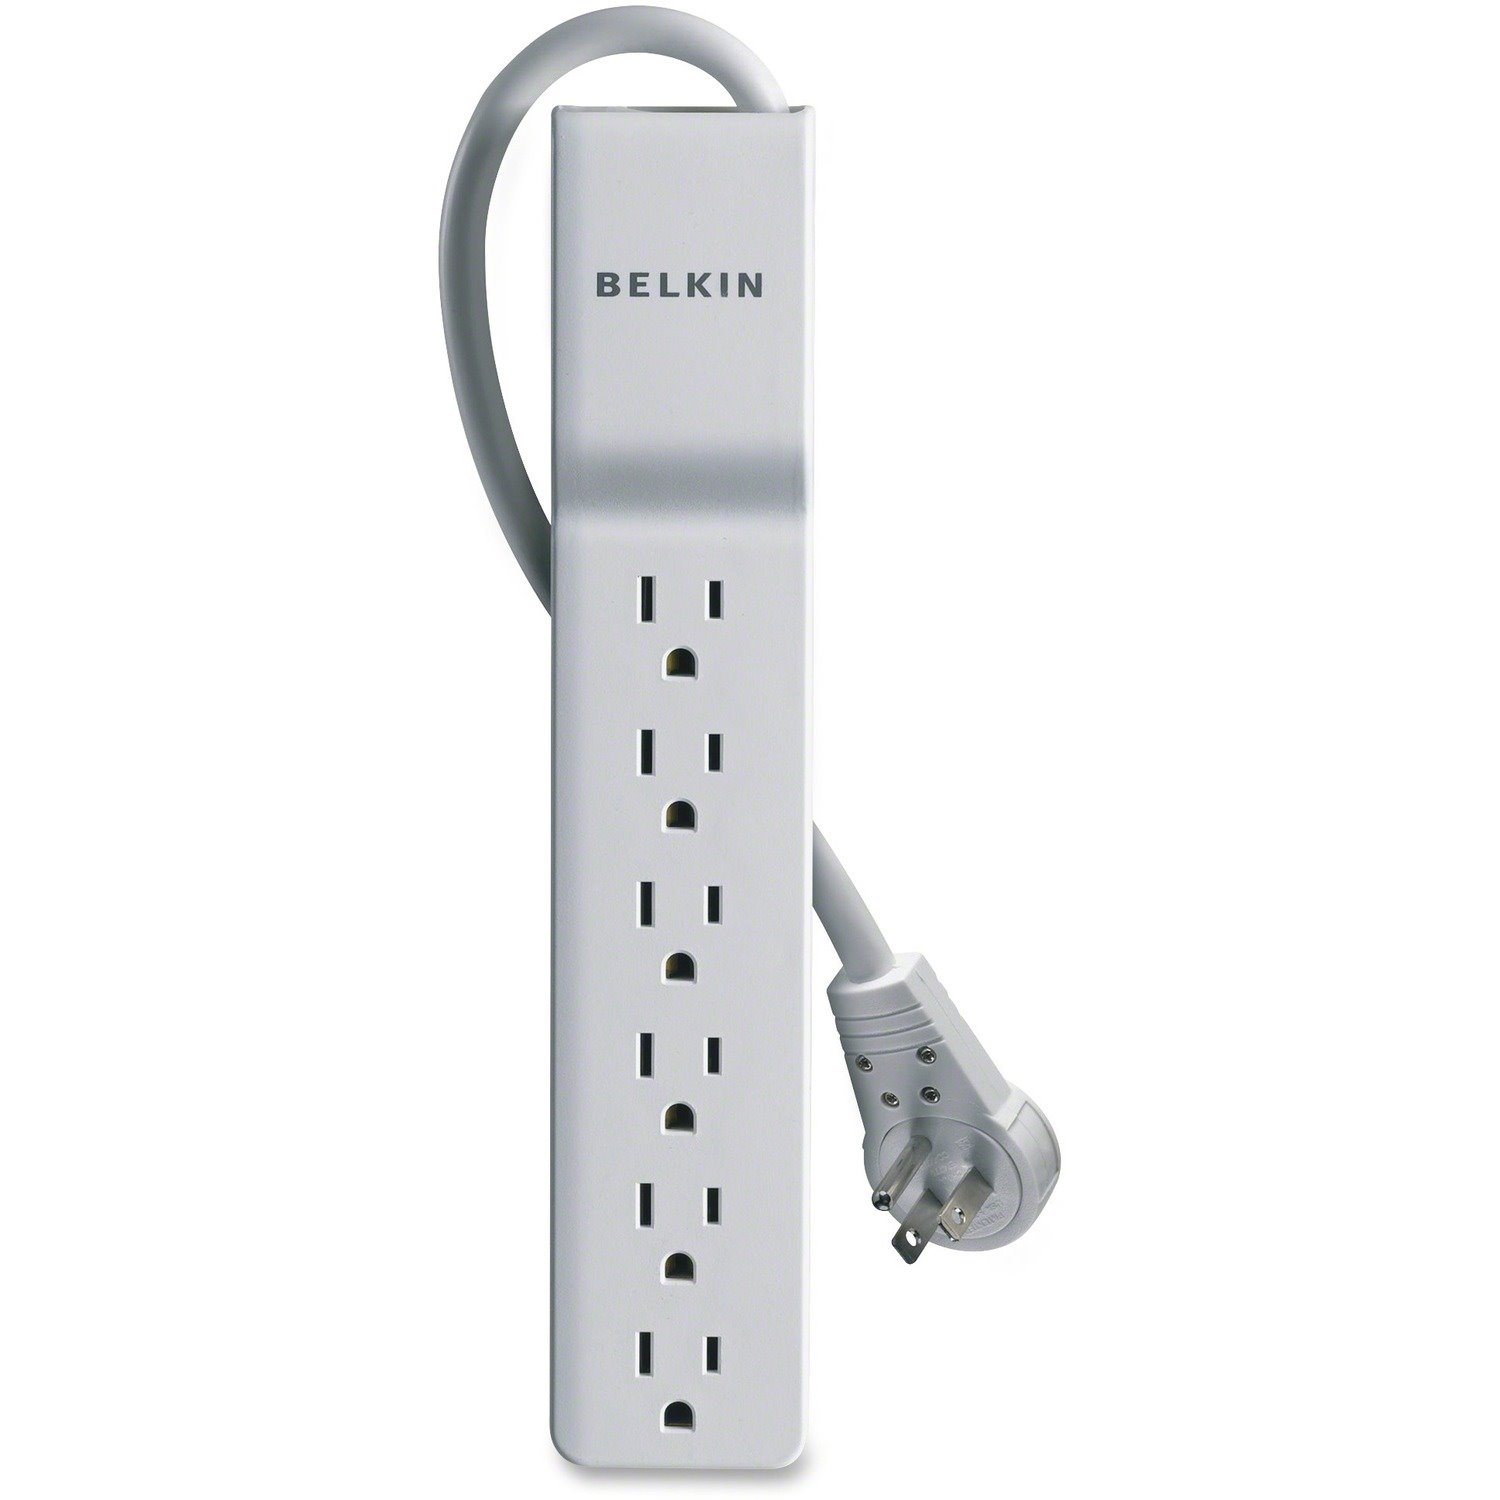 Belkin&reg; Home/Office Series Surge Protector With 6 Outlets And Rotating Plug